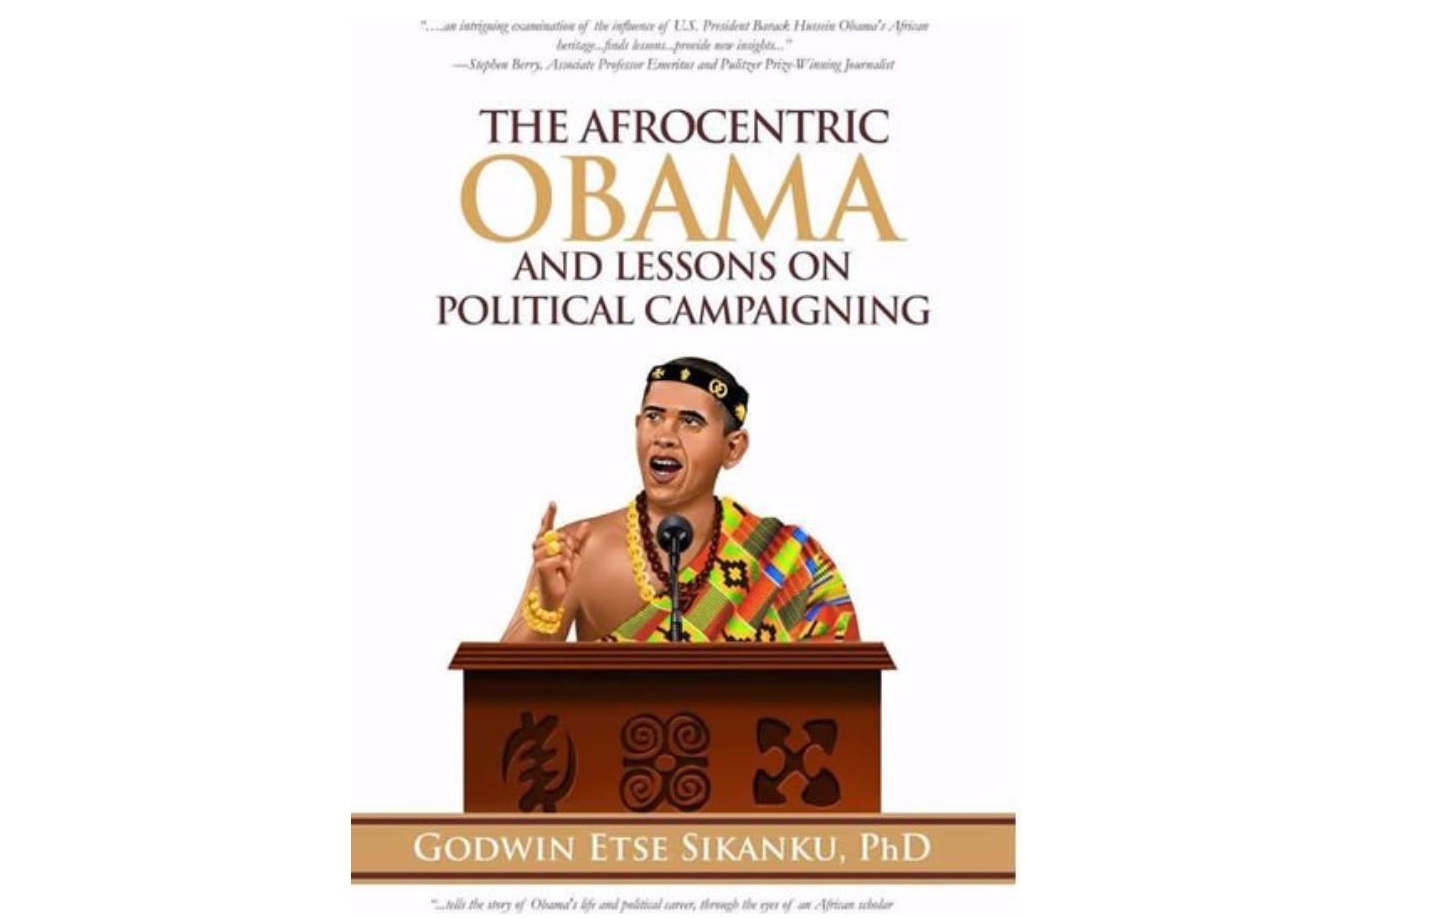 “Afrocentric Obama” book to be launched in Ghana